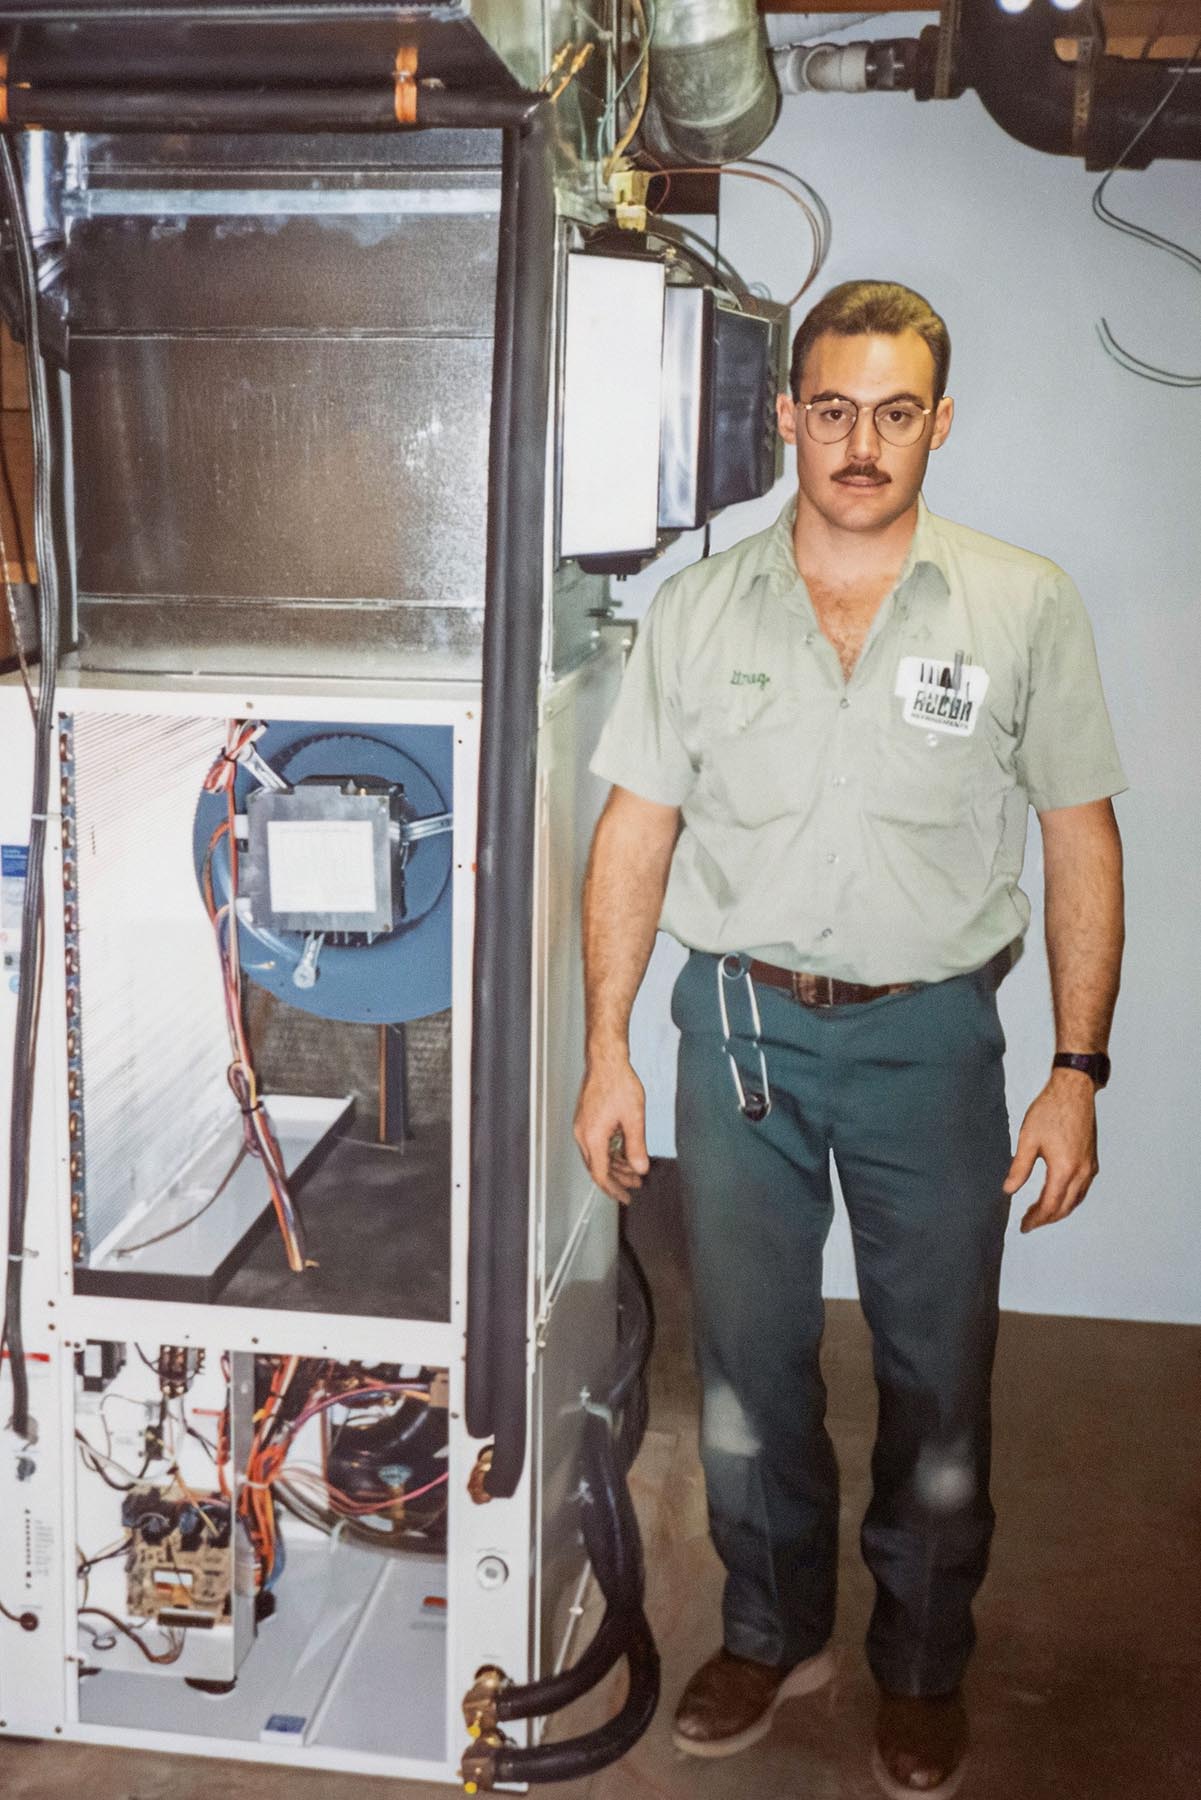 McElroy’s leader of residential HVAC installation and service, Greg Hunsicker, installed Topeka’s first geothermal furnaces in the early 1990s.